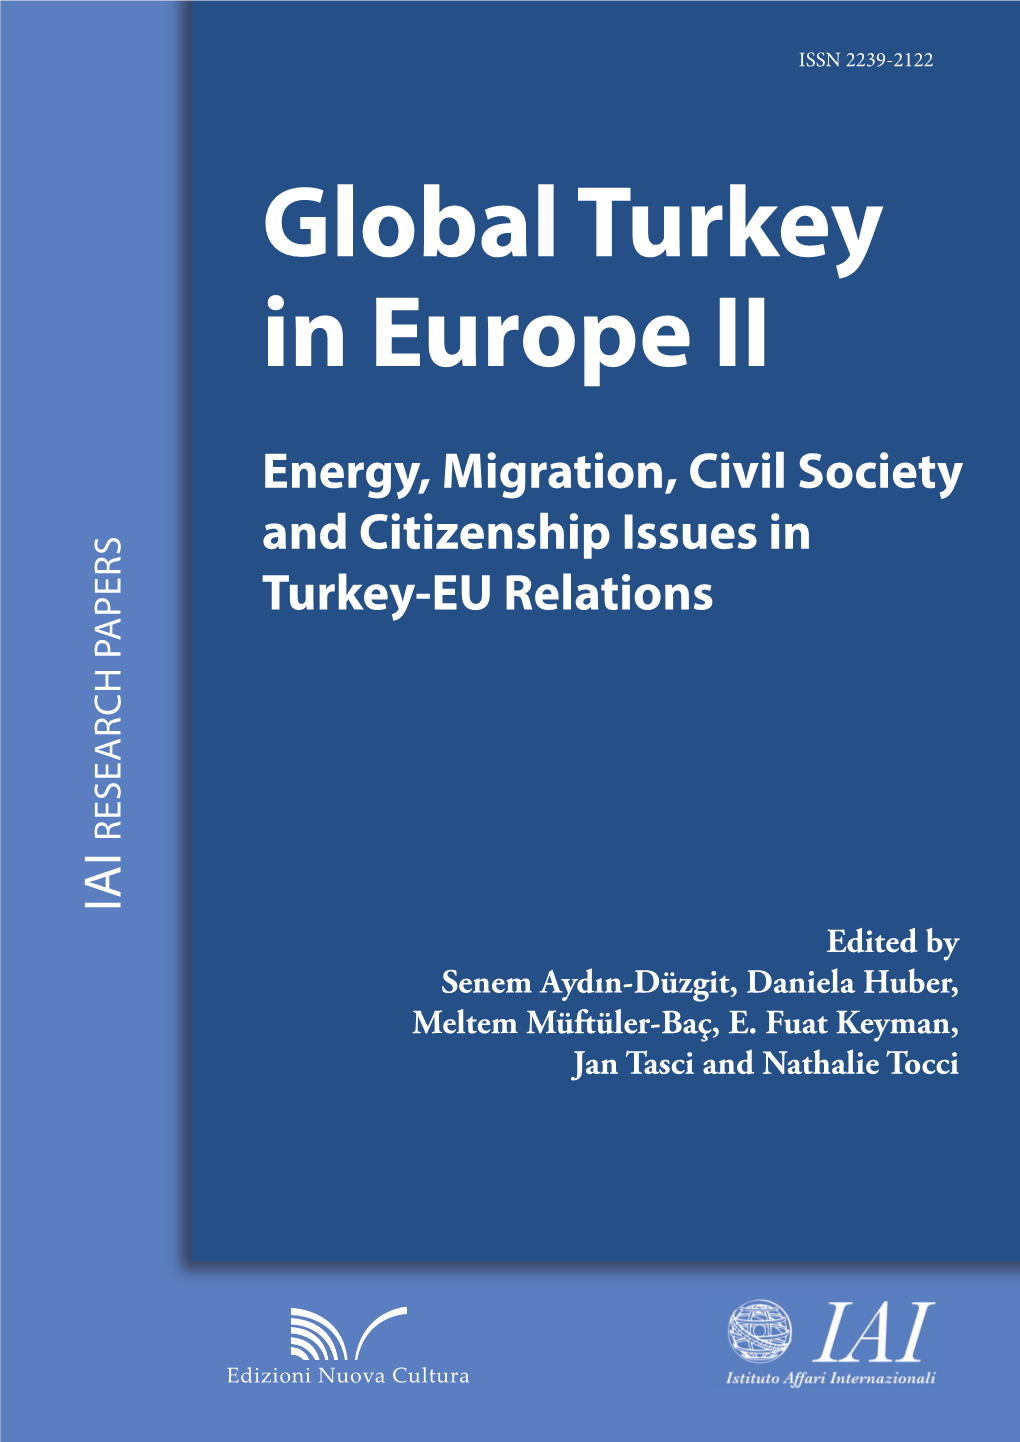 Global Turkey in Europe II. Energy, Migration, Civil Society and Citizenship Issues in Turkey-EU Relations